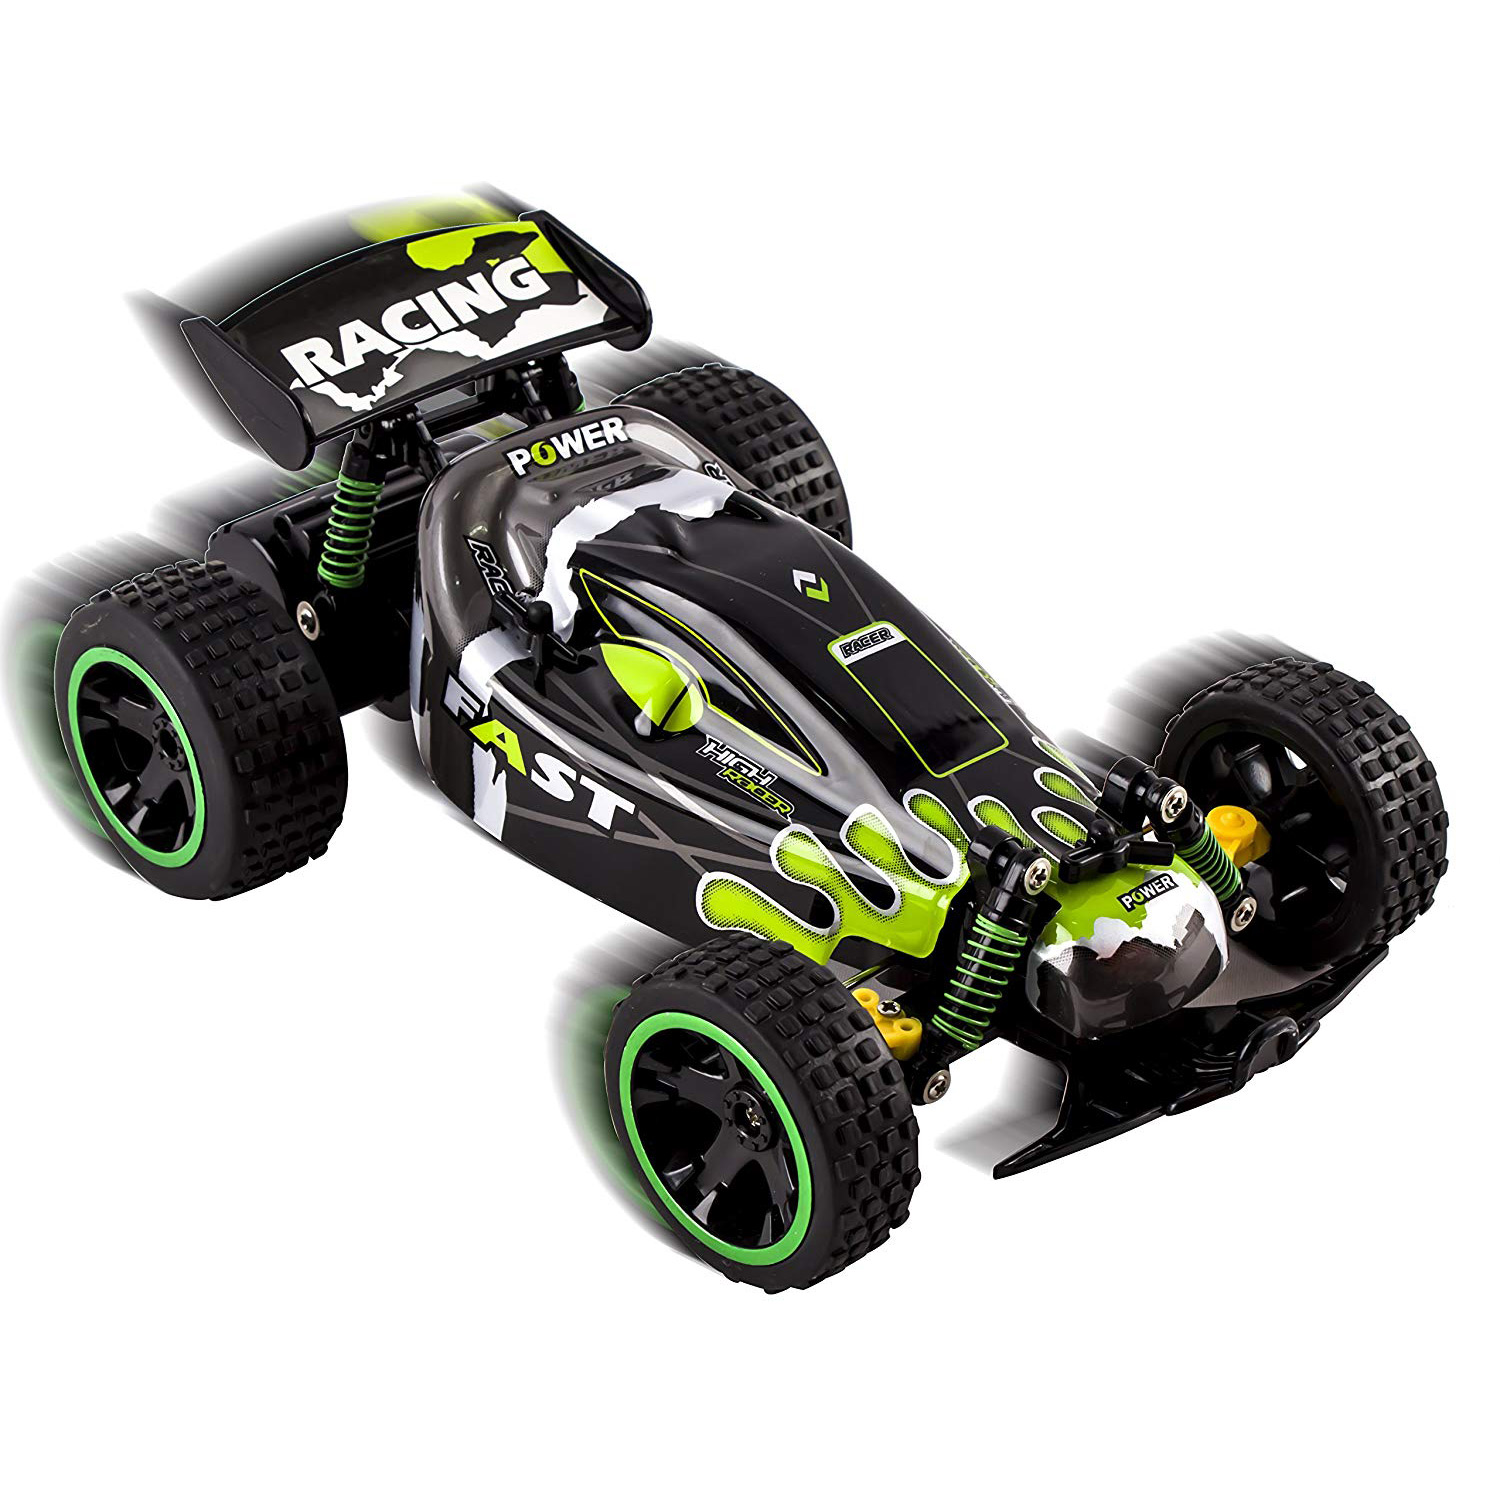 RC Buggy Truck 24Ghz System 118 Scale Remote Control High Speed Power With Working Off-Road Suspension Ready to Run Indoor And Outdoor Radio Car Toy Green QY1801B